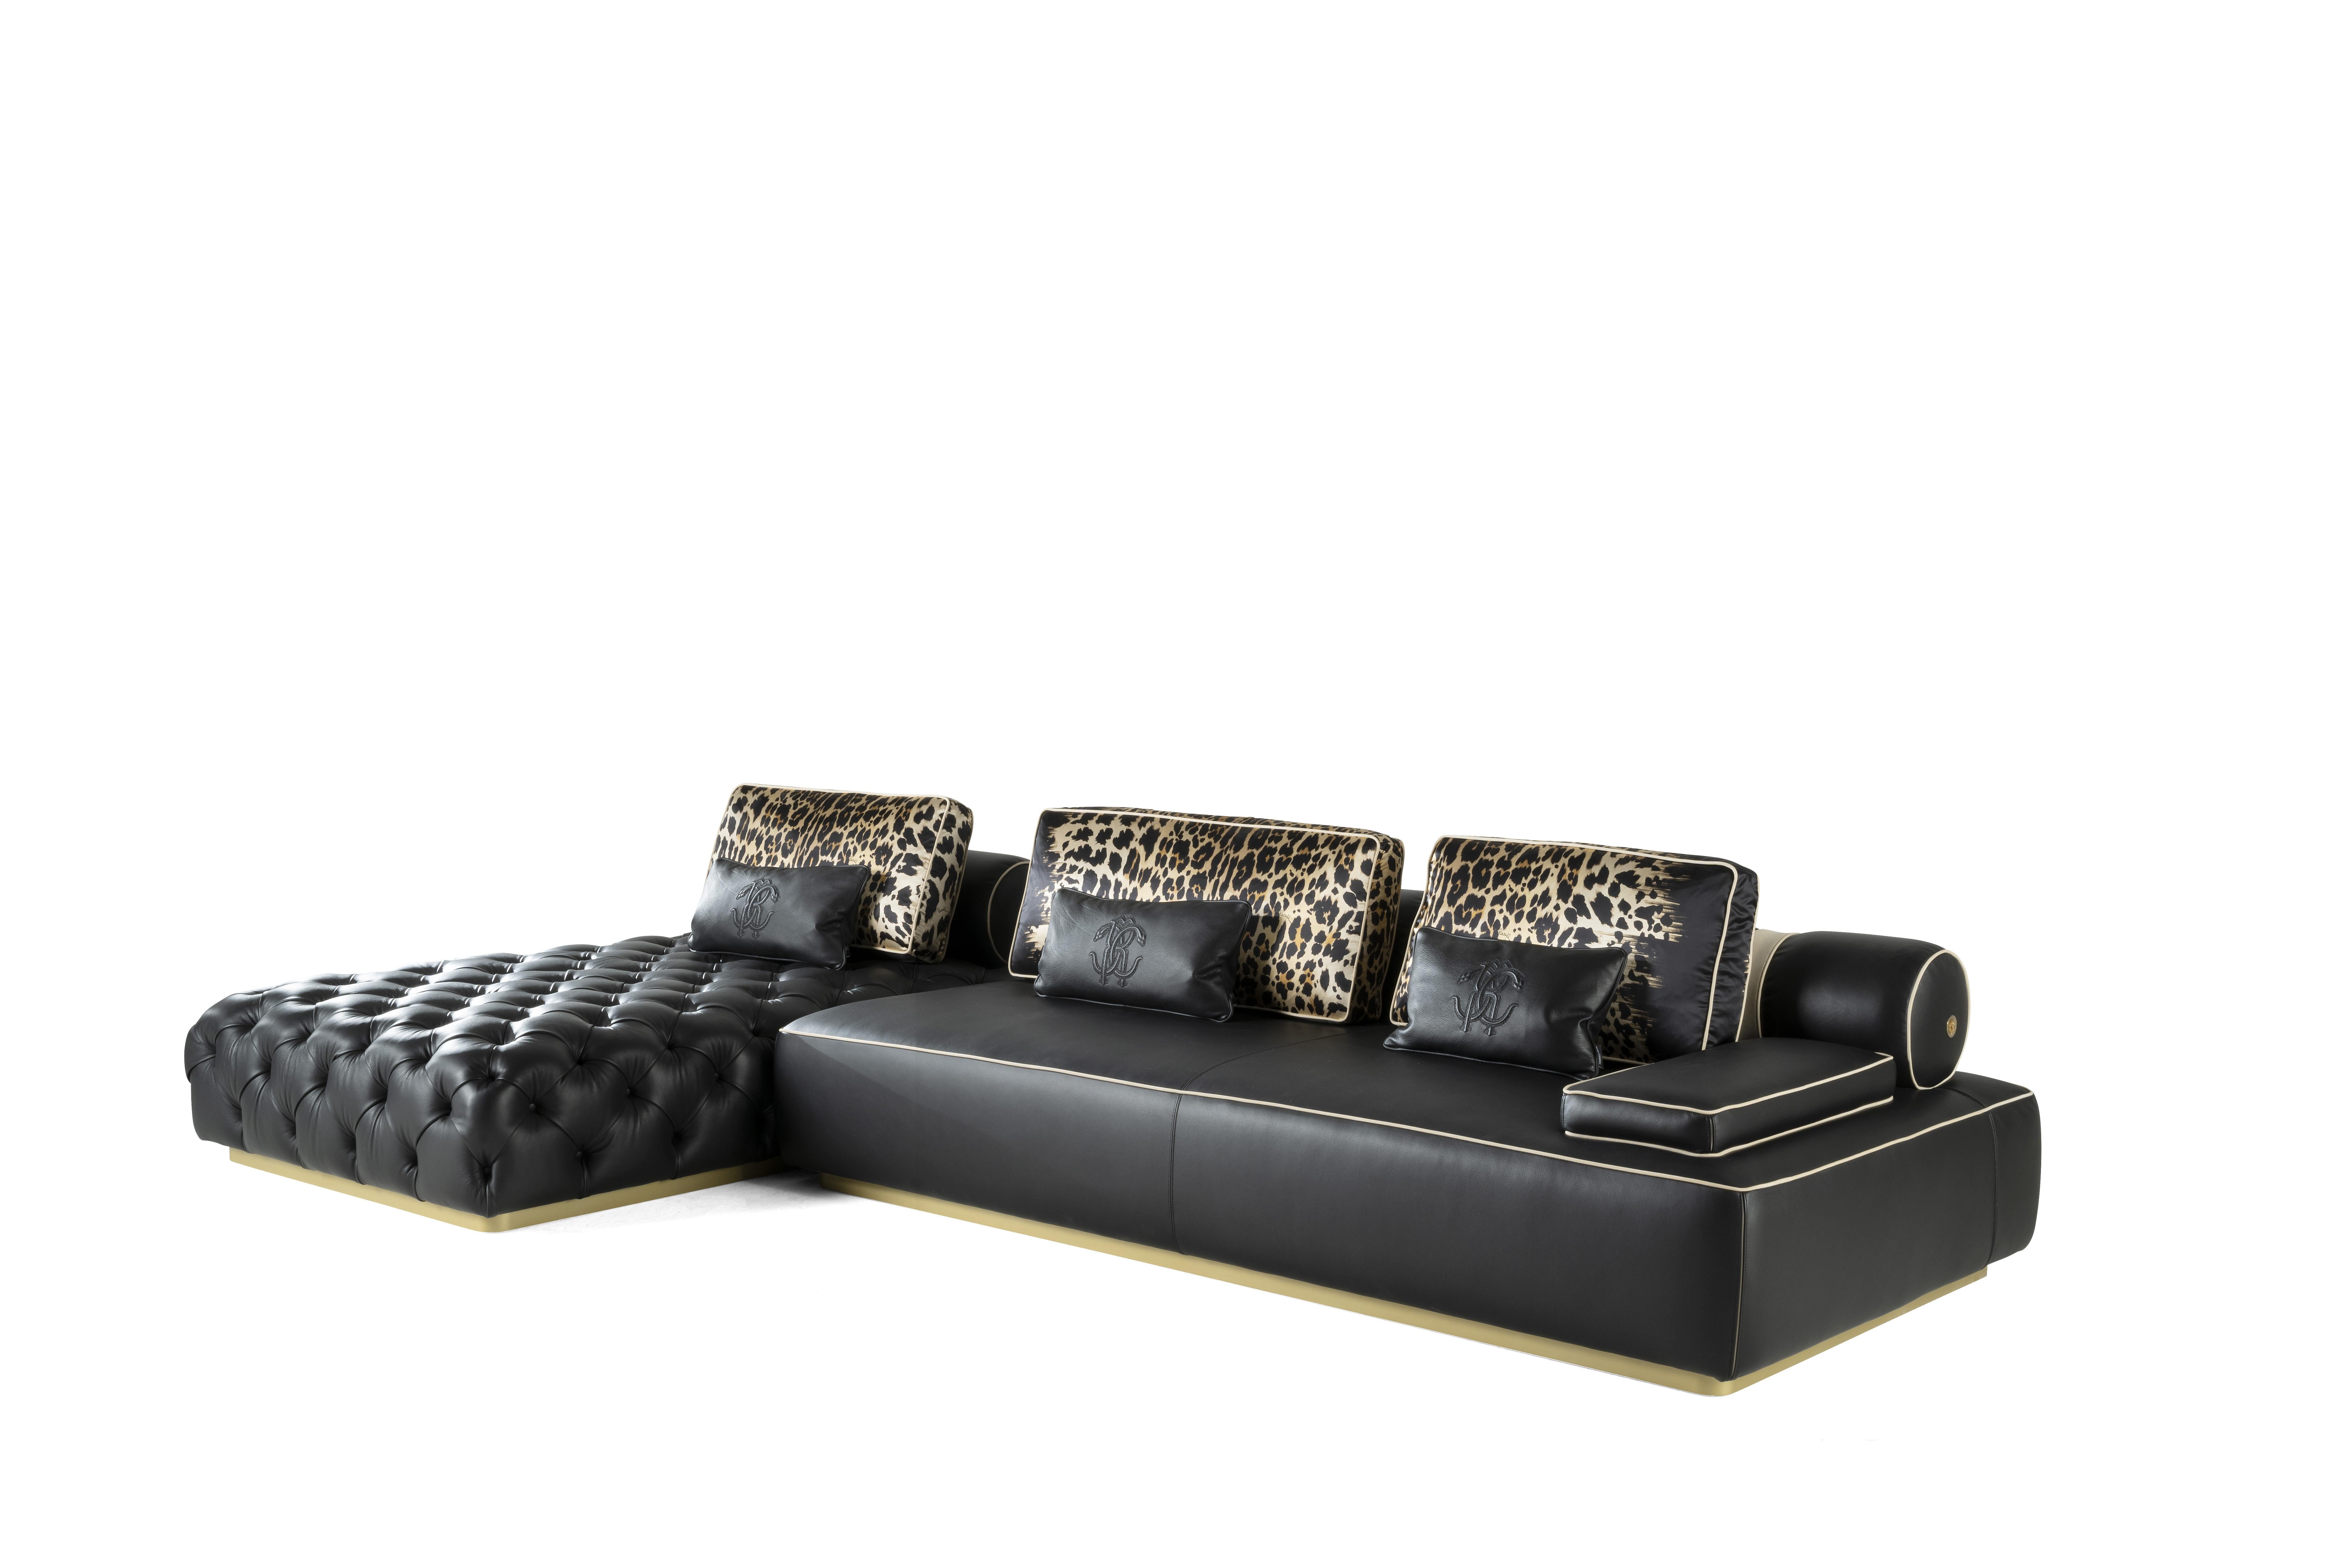 Darlington is an iconic modular sofa of the Roberto Cavalli Home Interiors collection, characterized by a refined capitonné finishing. In this new version, the sofa is presented with black leather upholstery and piping in cream-colored nubuck,